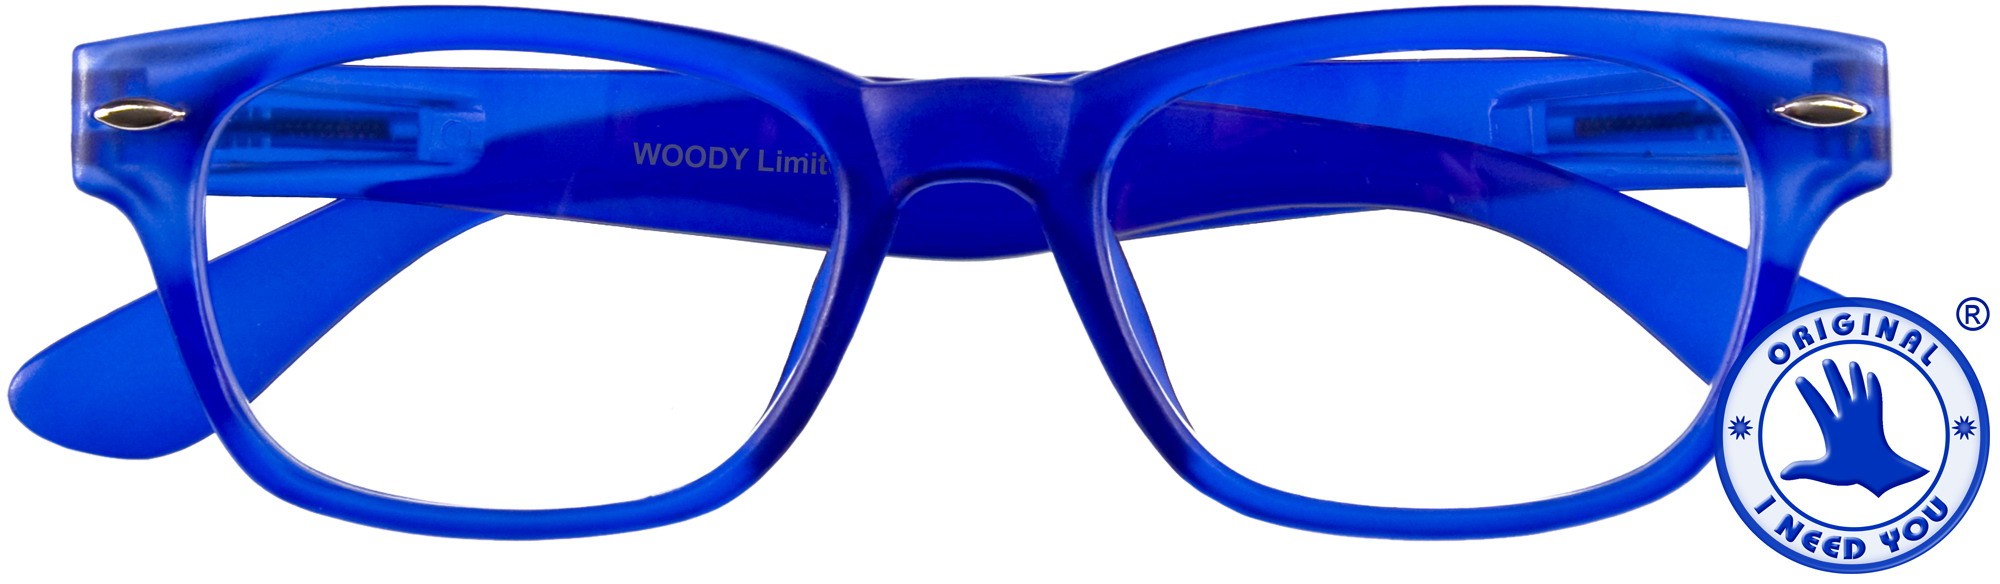 Woody Limited (blue)